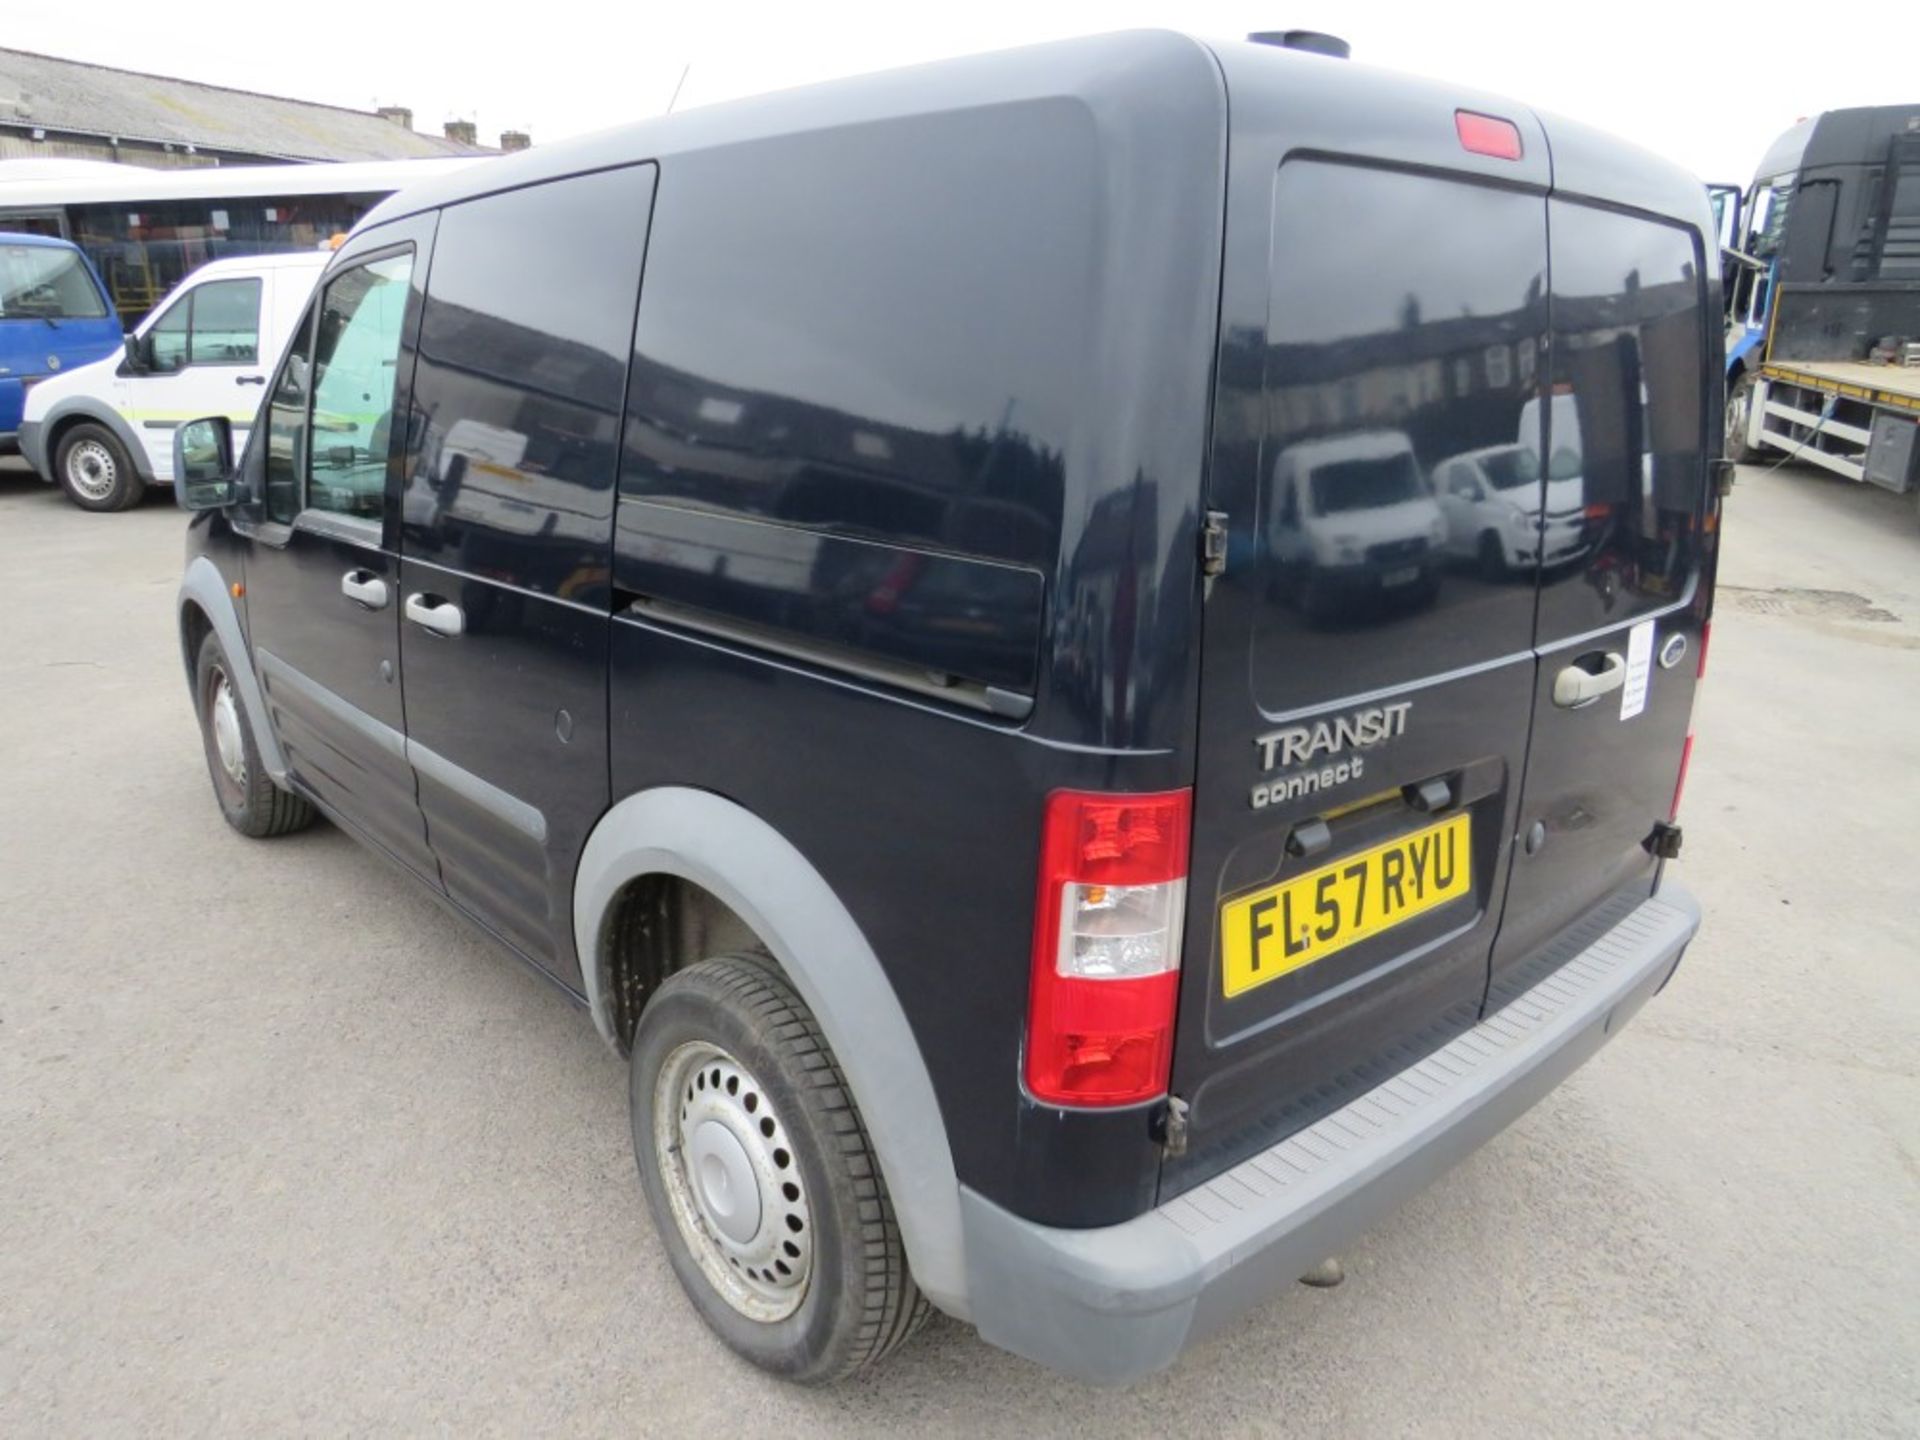 57 reg FORD TRANSIT CONNECT T220 LX90 (DIRECT COUNCIL) 1ST REG 09/07, TEST 09/21, 43873M - Image 3 of 7